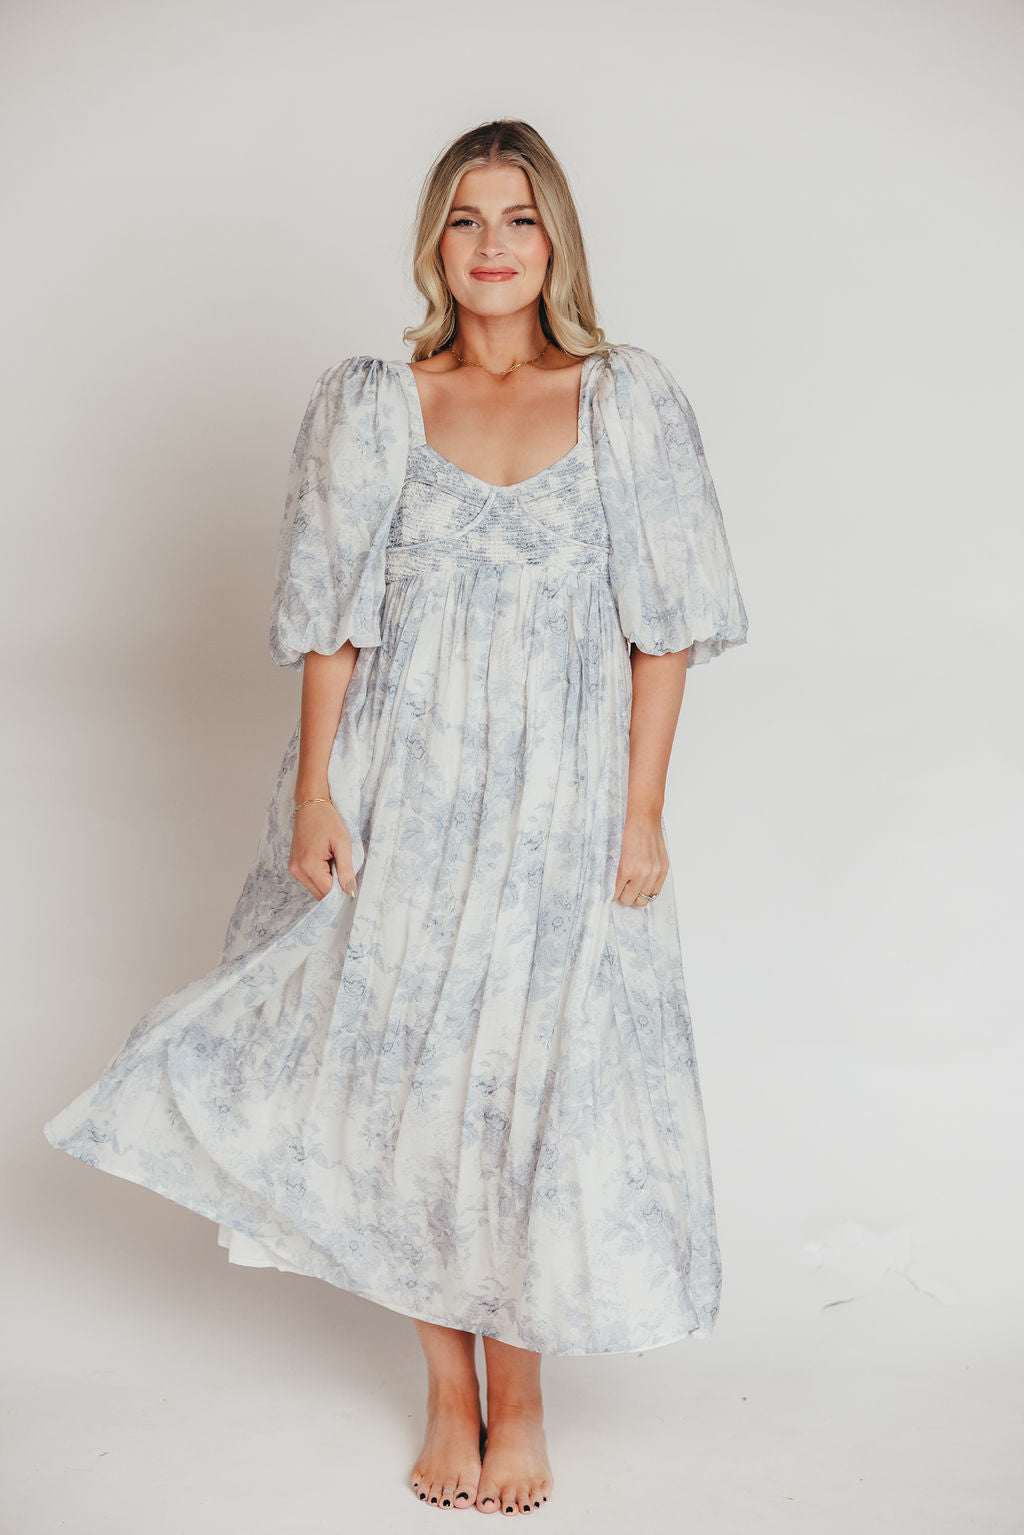 Harlow Maxi Dress in Light Blue Floral - Bump Friendly & Inclusive Sizing (S-3XL)